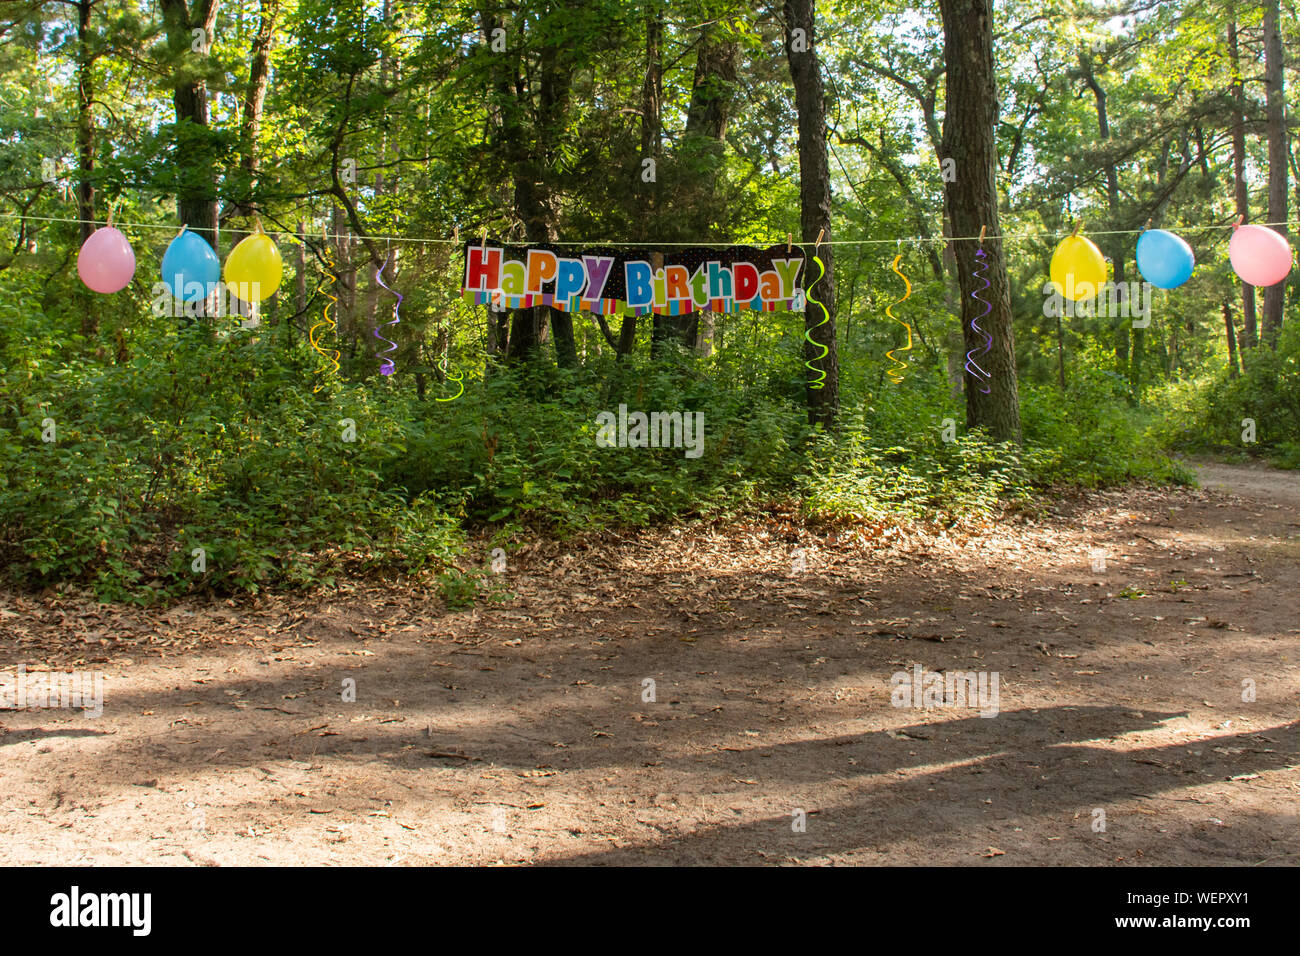 Happy Birthday sign panorama in the outdoor trees with balloons ...